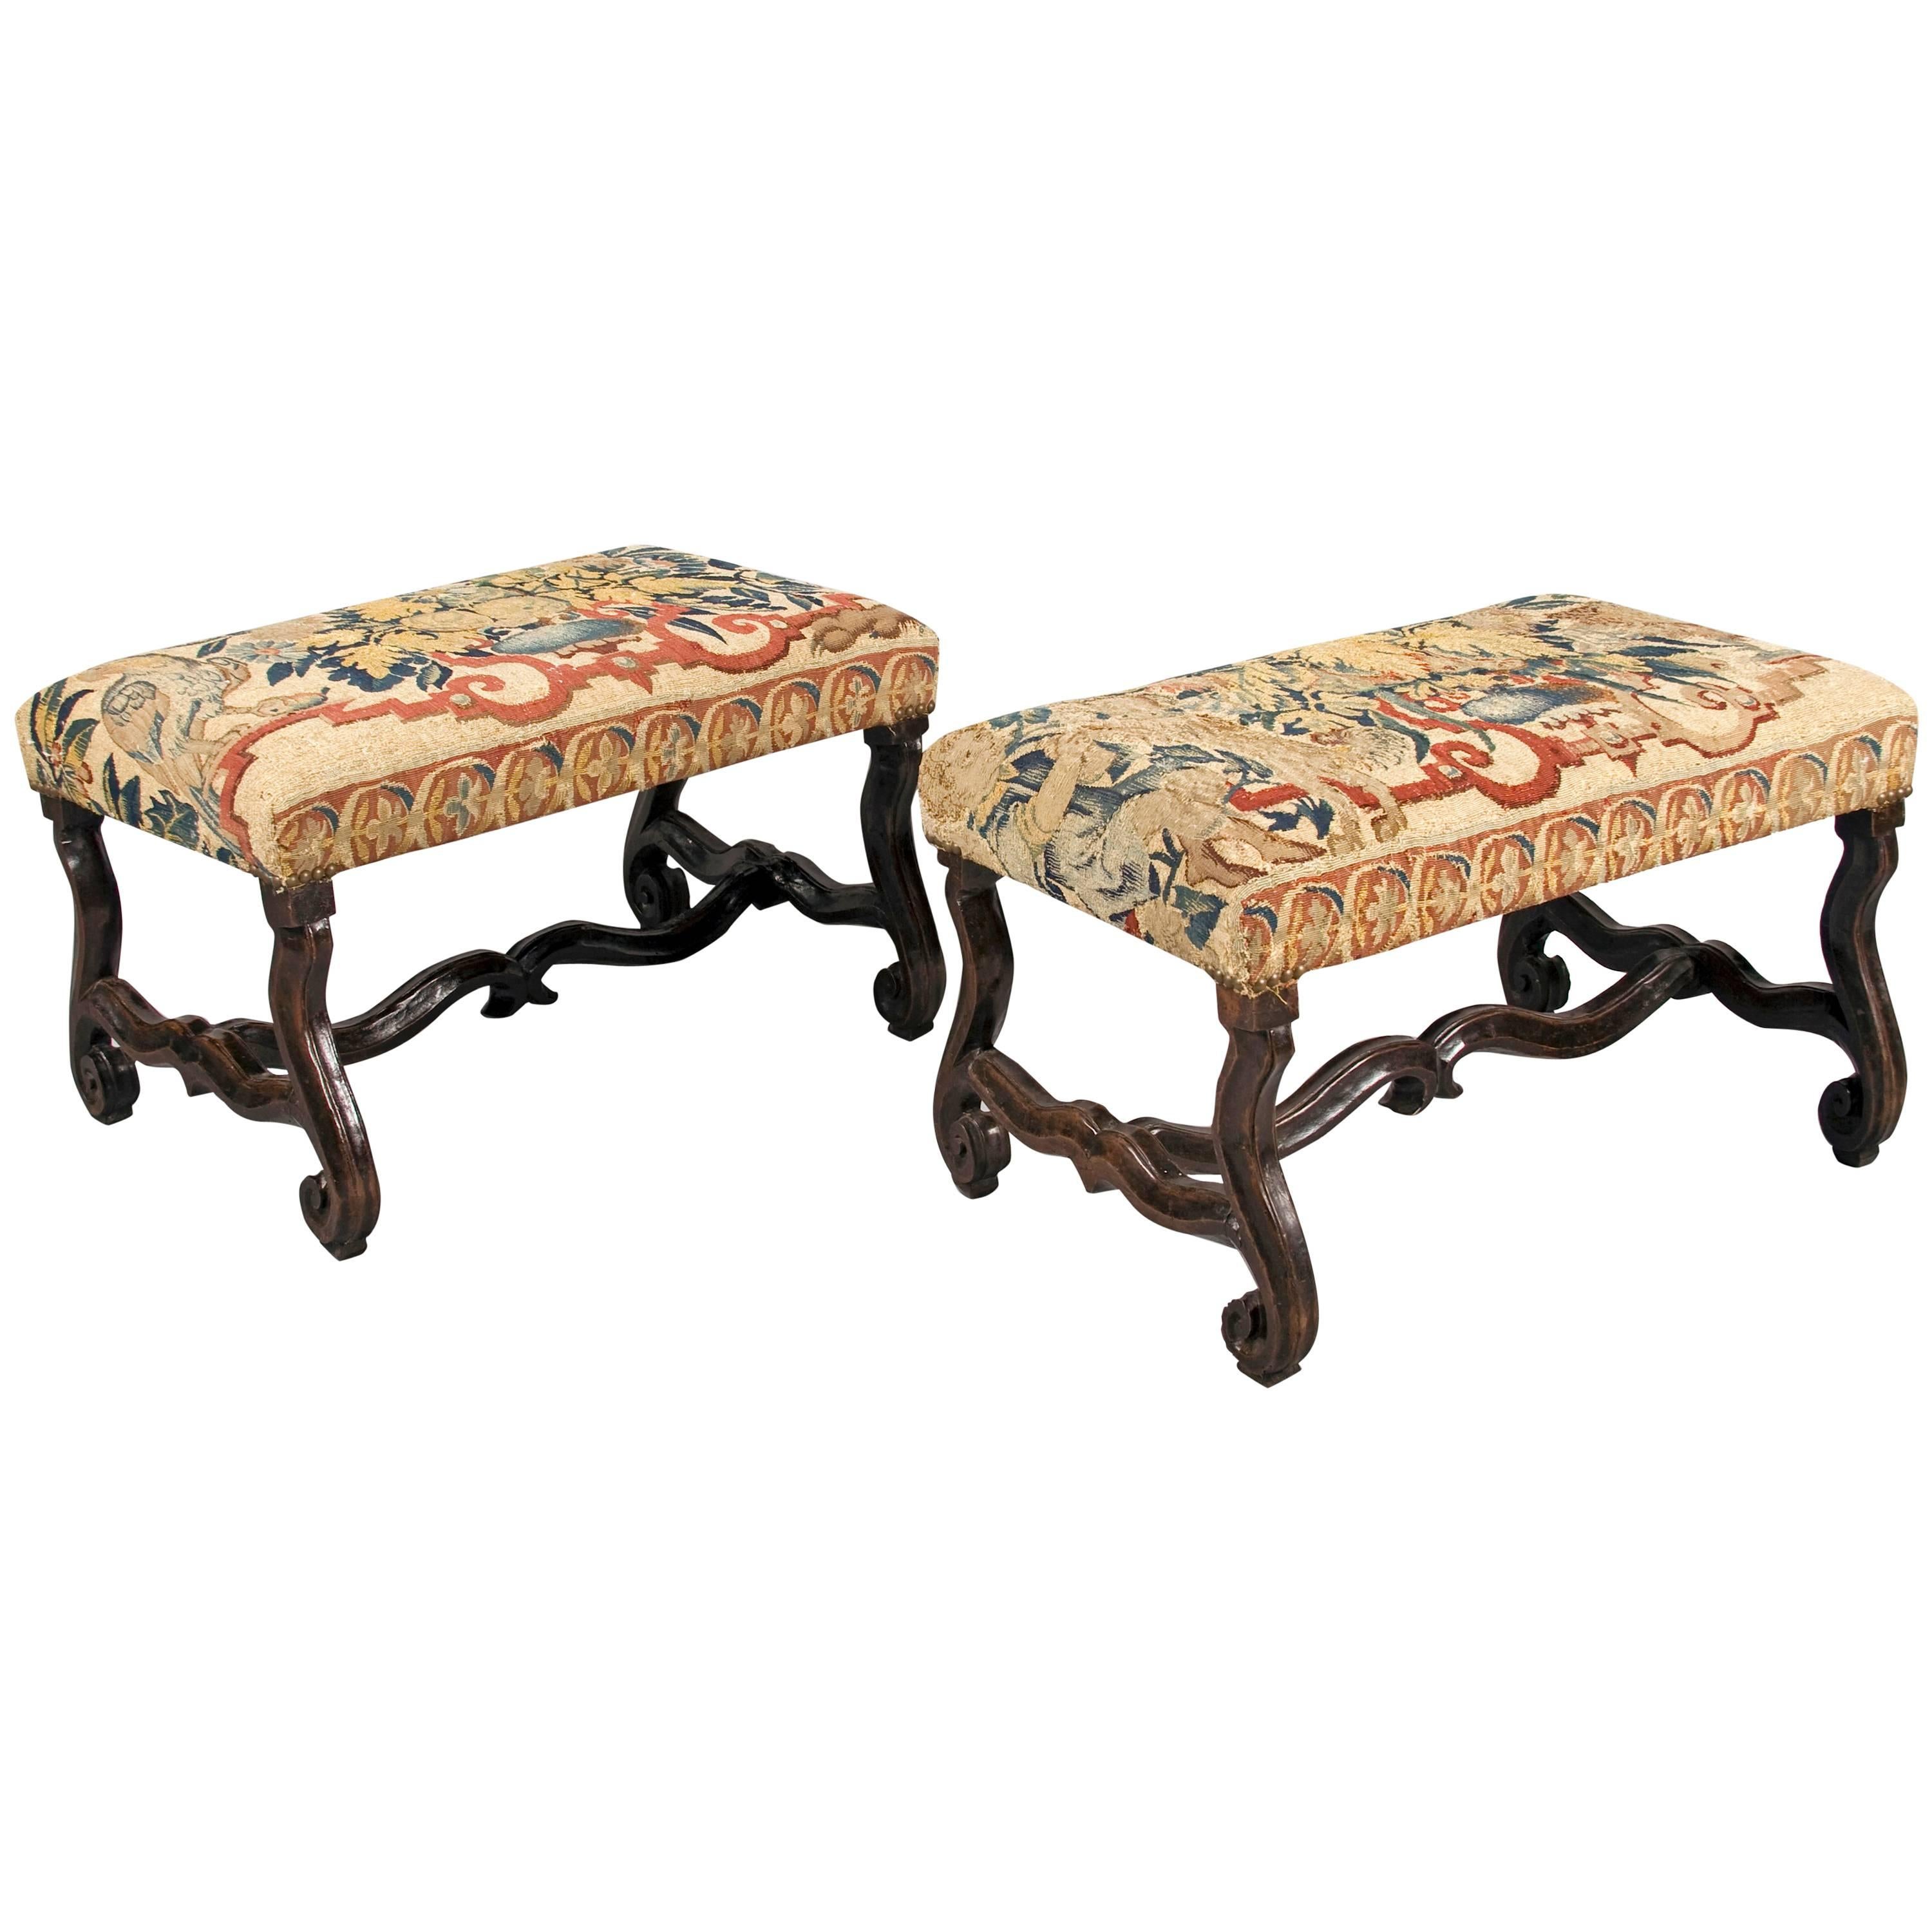 William III Walnut Stools with Os De Mouton legs and conforming Stretcher